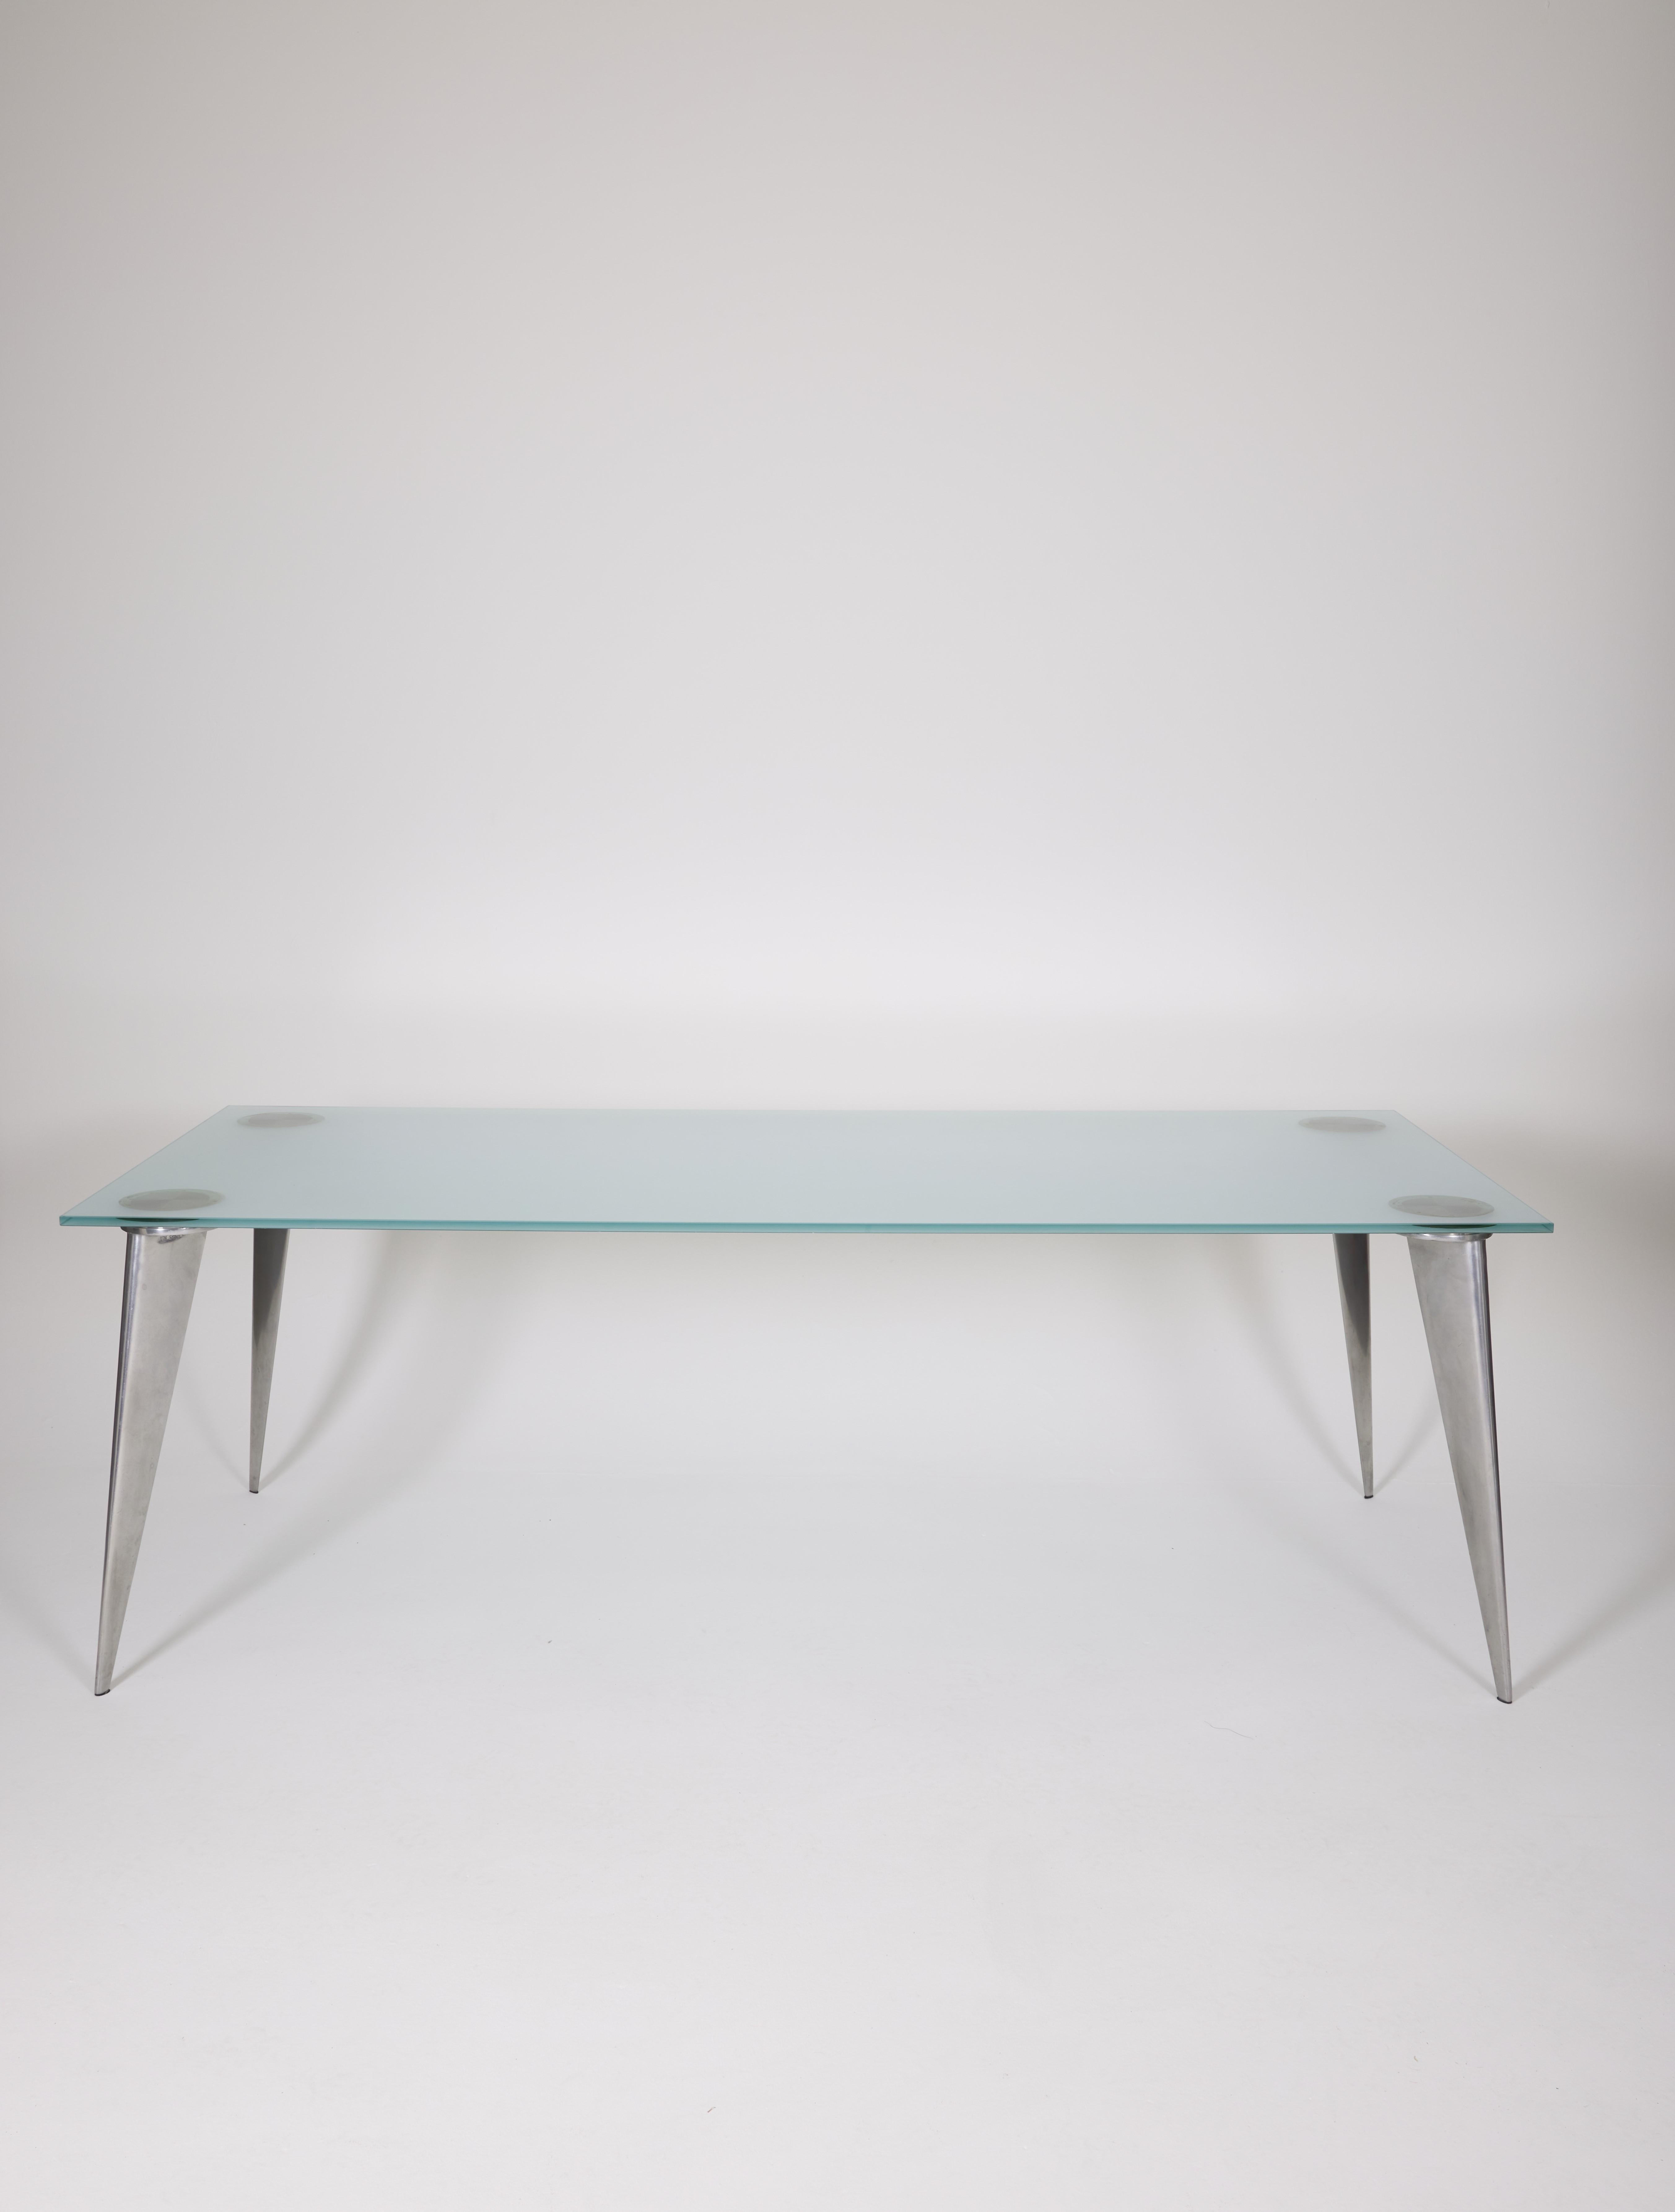 Dining table model J. Lang series by Phillippe Starck for Driade, 1991. Sandblasted glass top and cast aluminum base. Good condition with some traces of use.